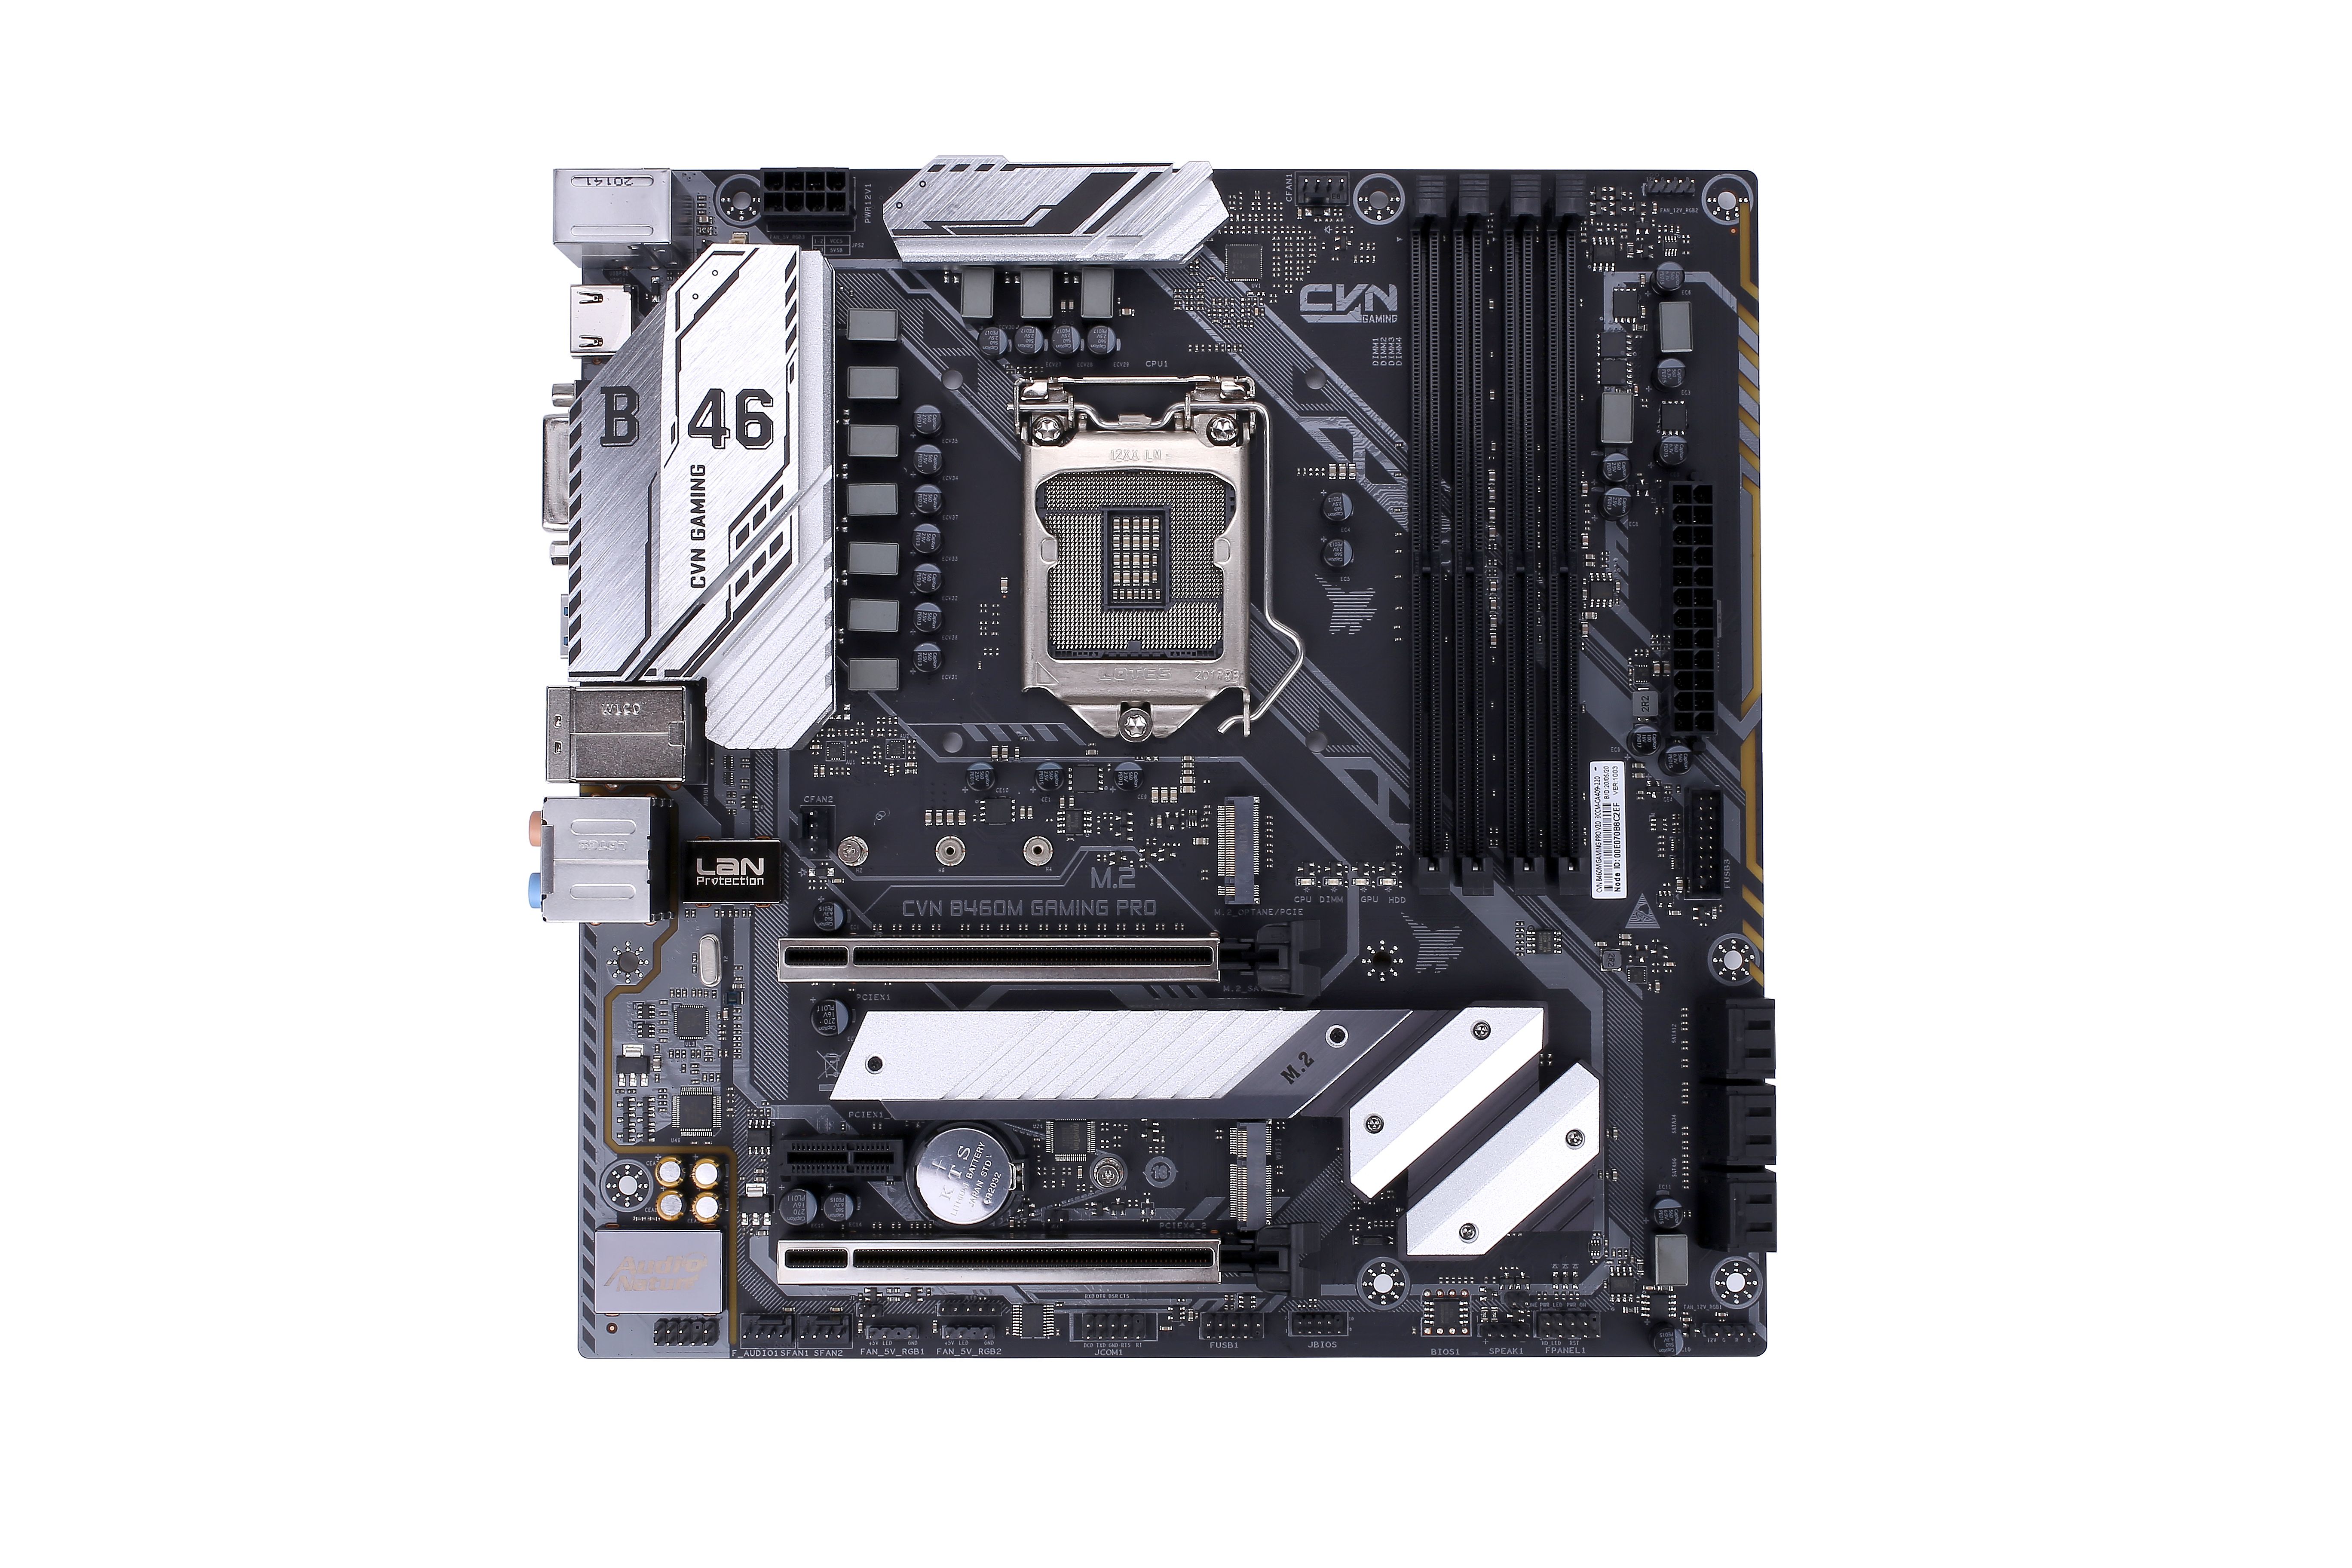 Colorful-CVN-B460M-GAMING-PRO-V20-Computer-Motherboard-PC-Desktop-Motherboard-Supports-10th-Generati-1710083